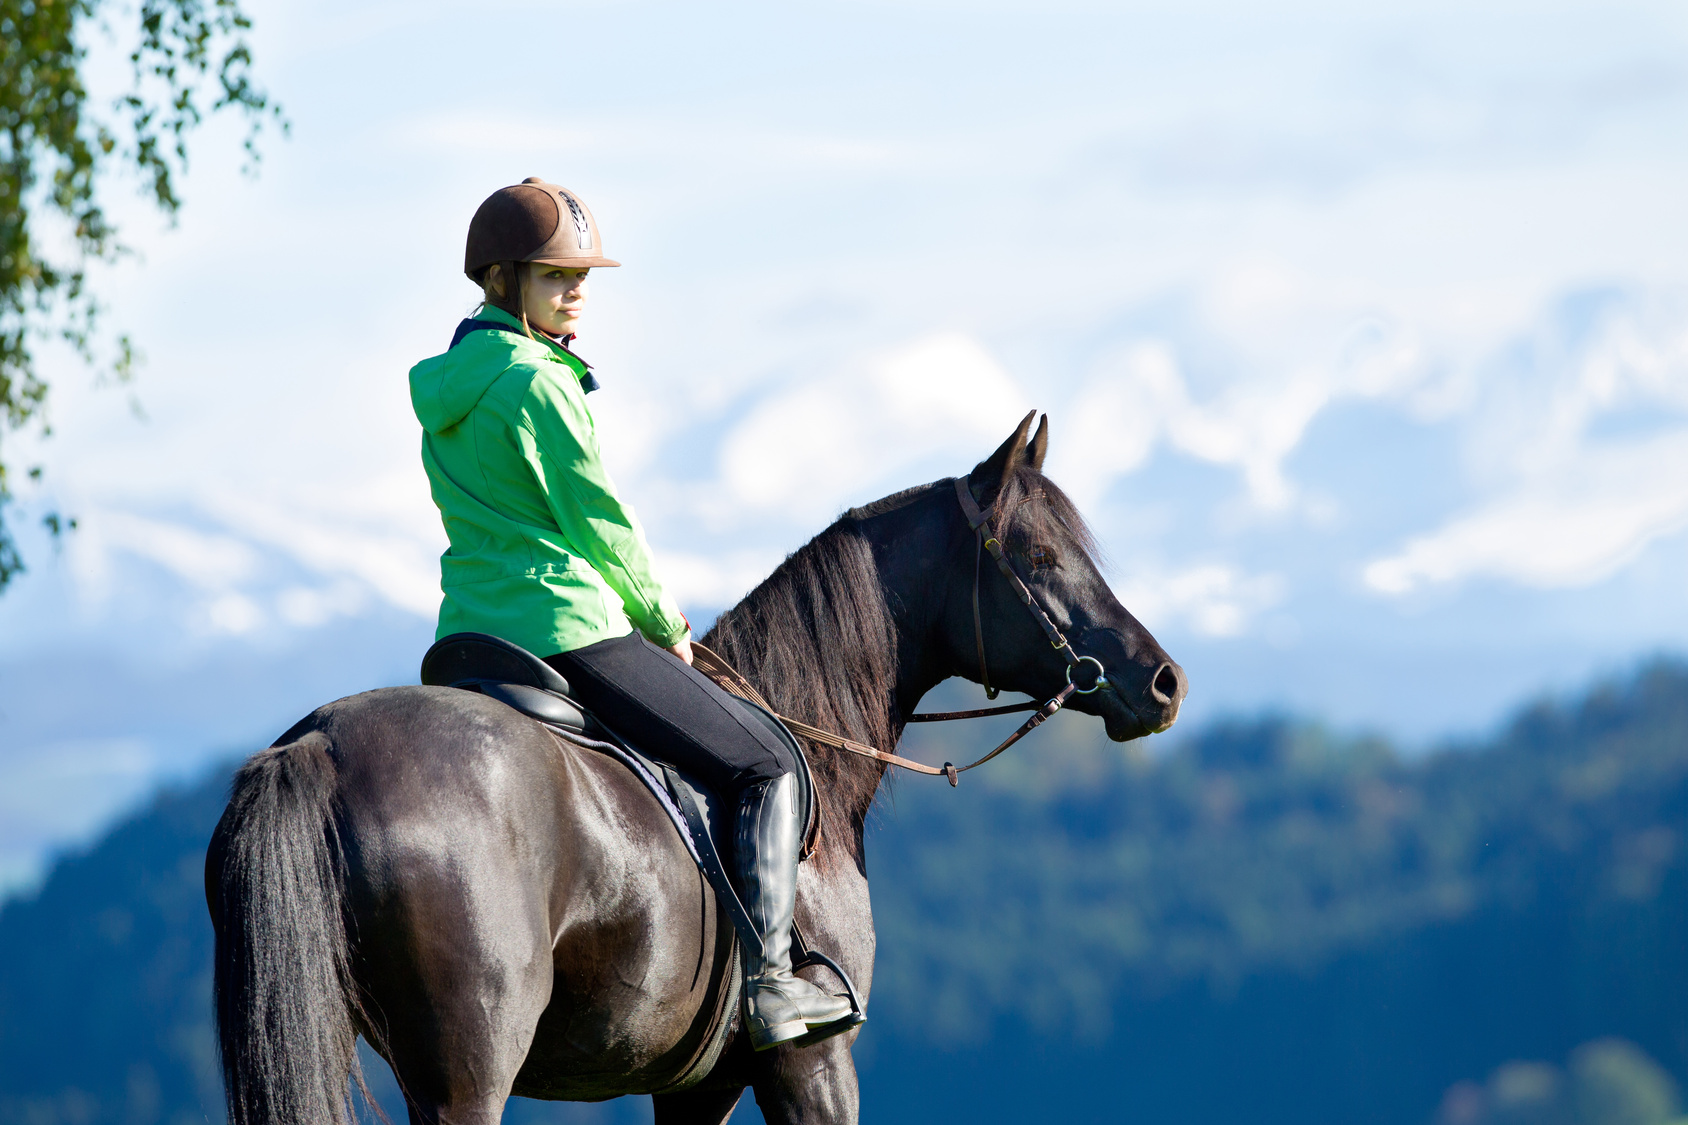 The Importance of “Fluid Motion when on Horseback”